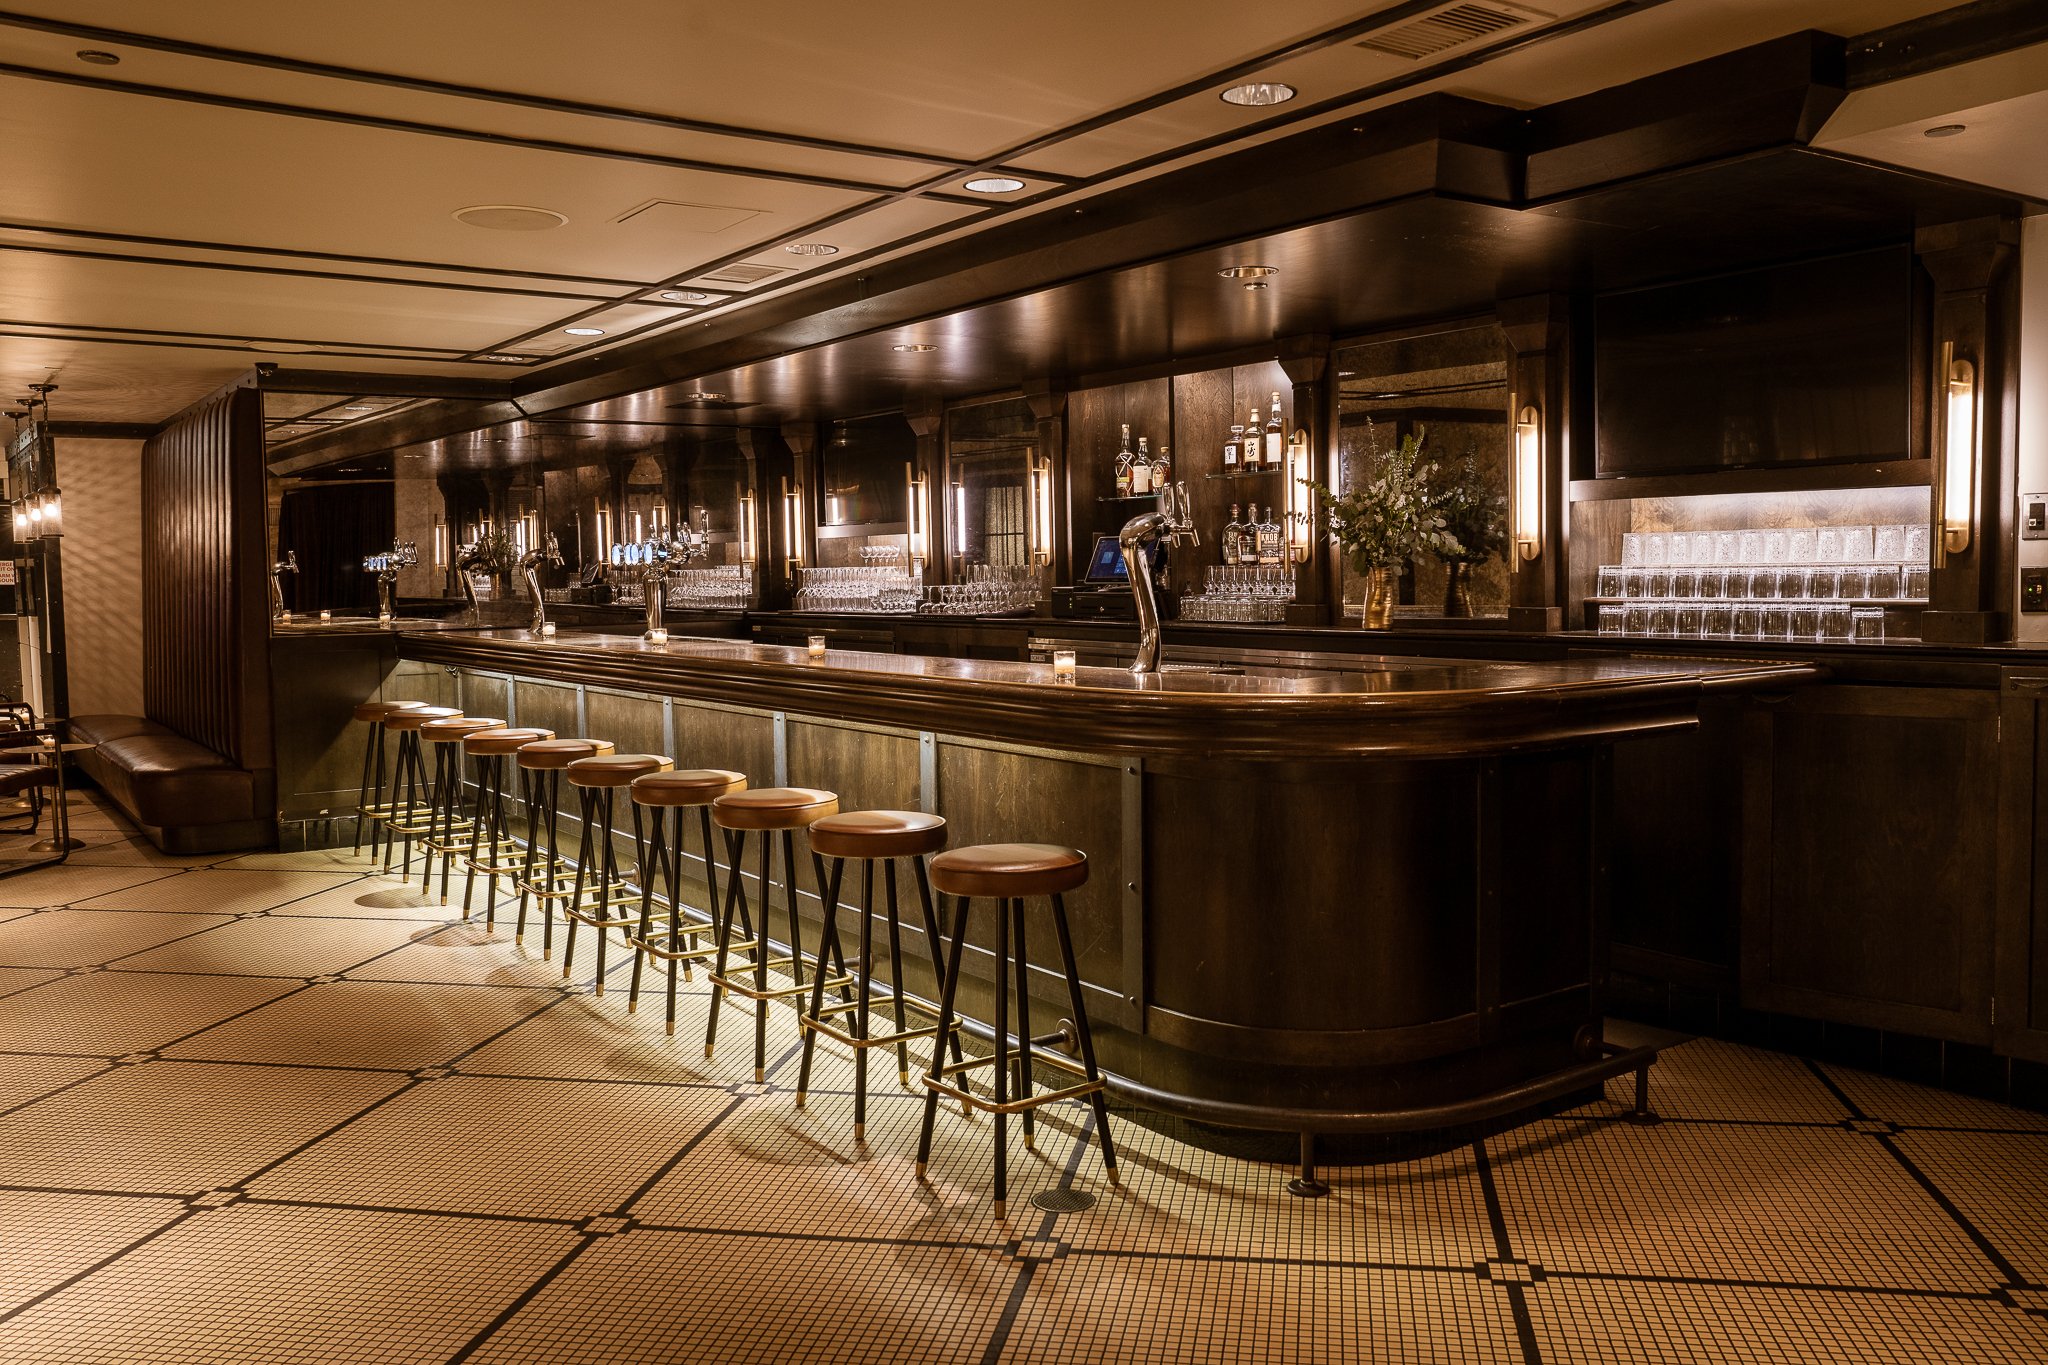 Cozy Theodore Ascher bar, warmly lit, with intricate wooden details and elegant black-and-white tile flooring.